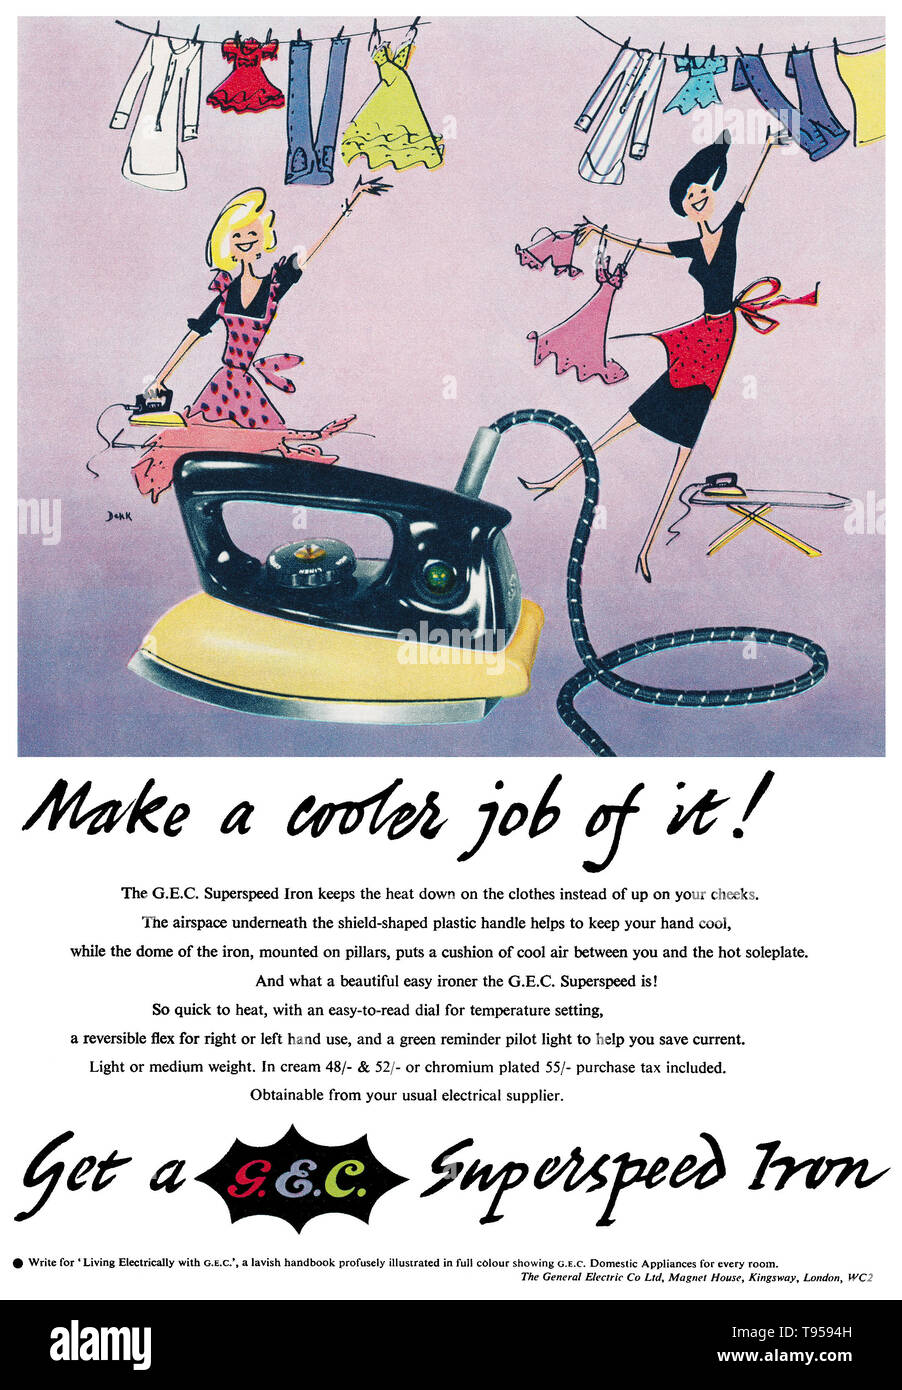 1958 British advertisement for a GEC Superspeed Iron. Stock Photo